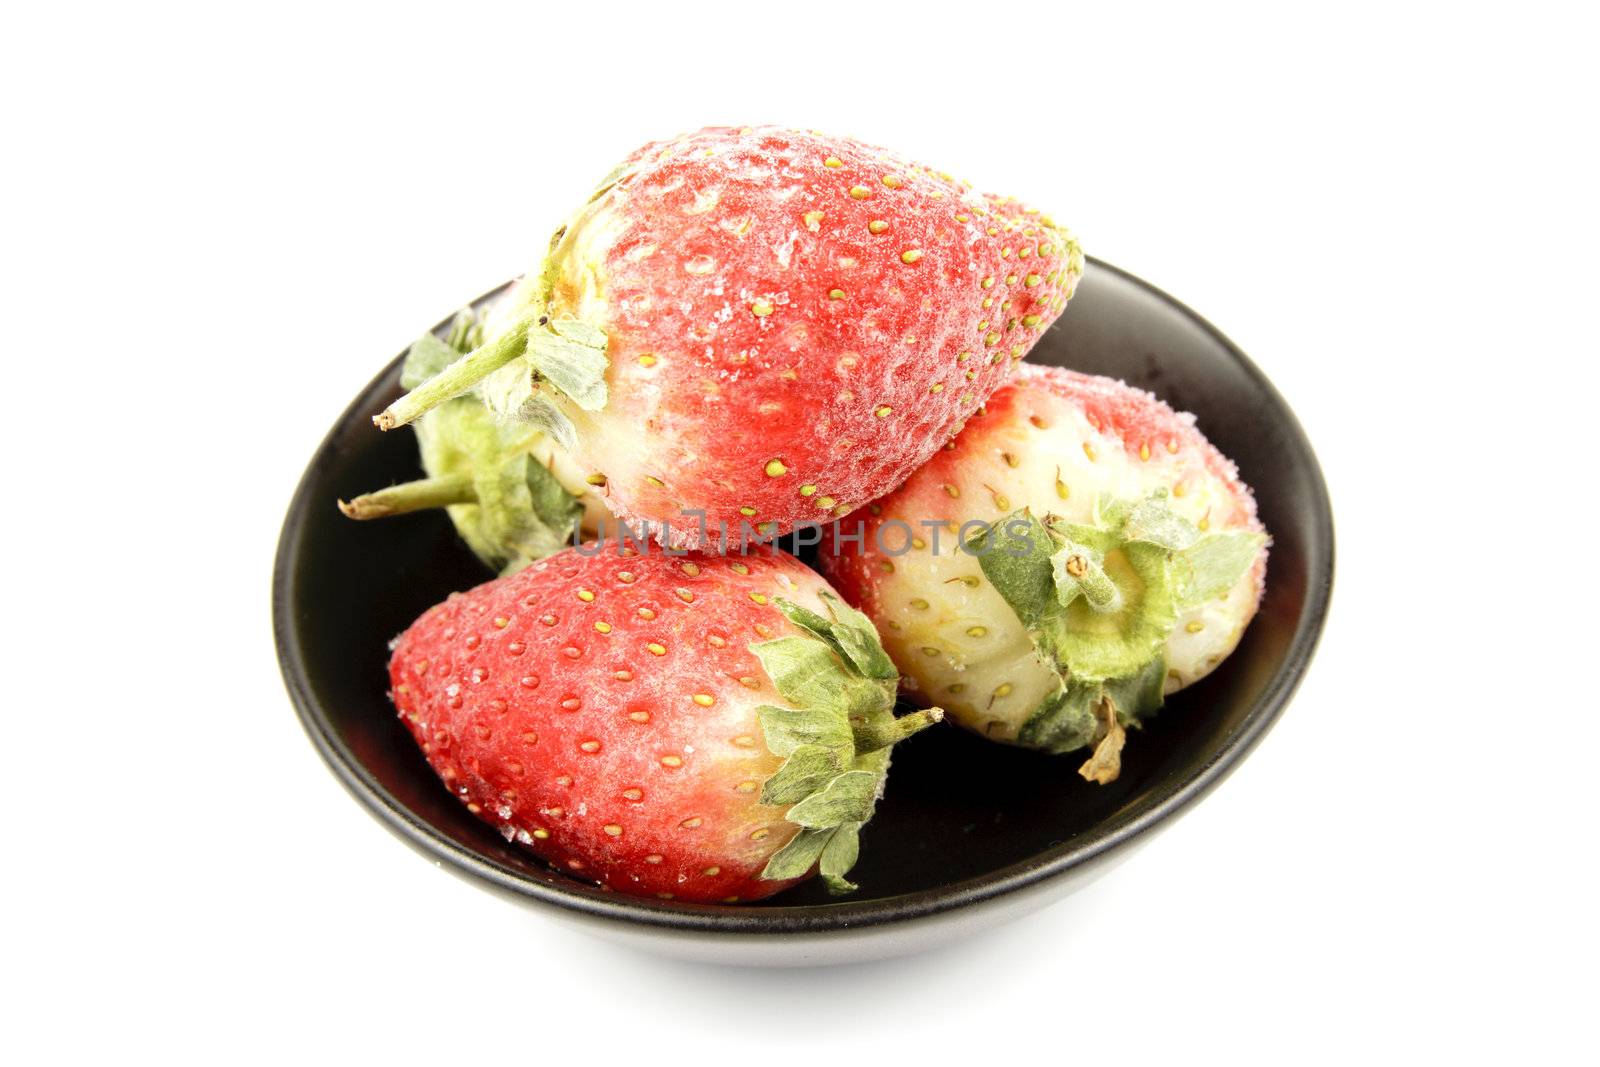 Red ripe frozen strawberries in a small black bowl on a reflective white background